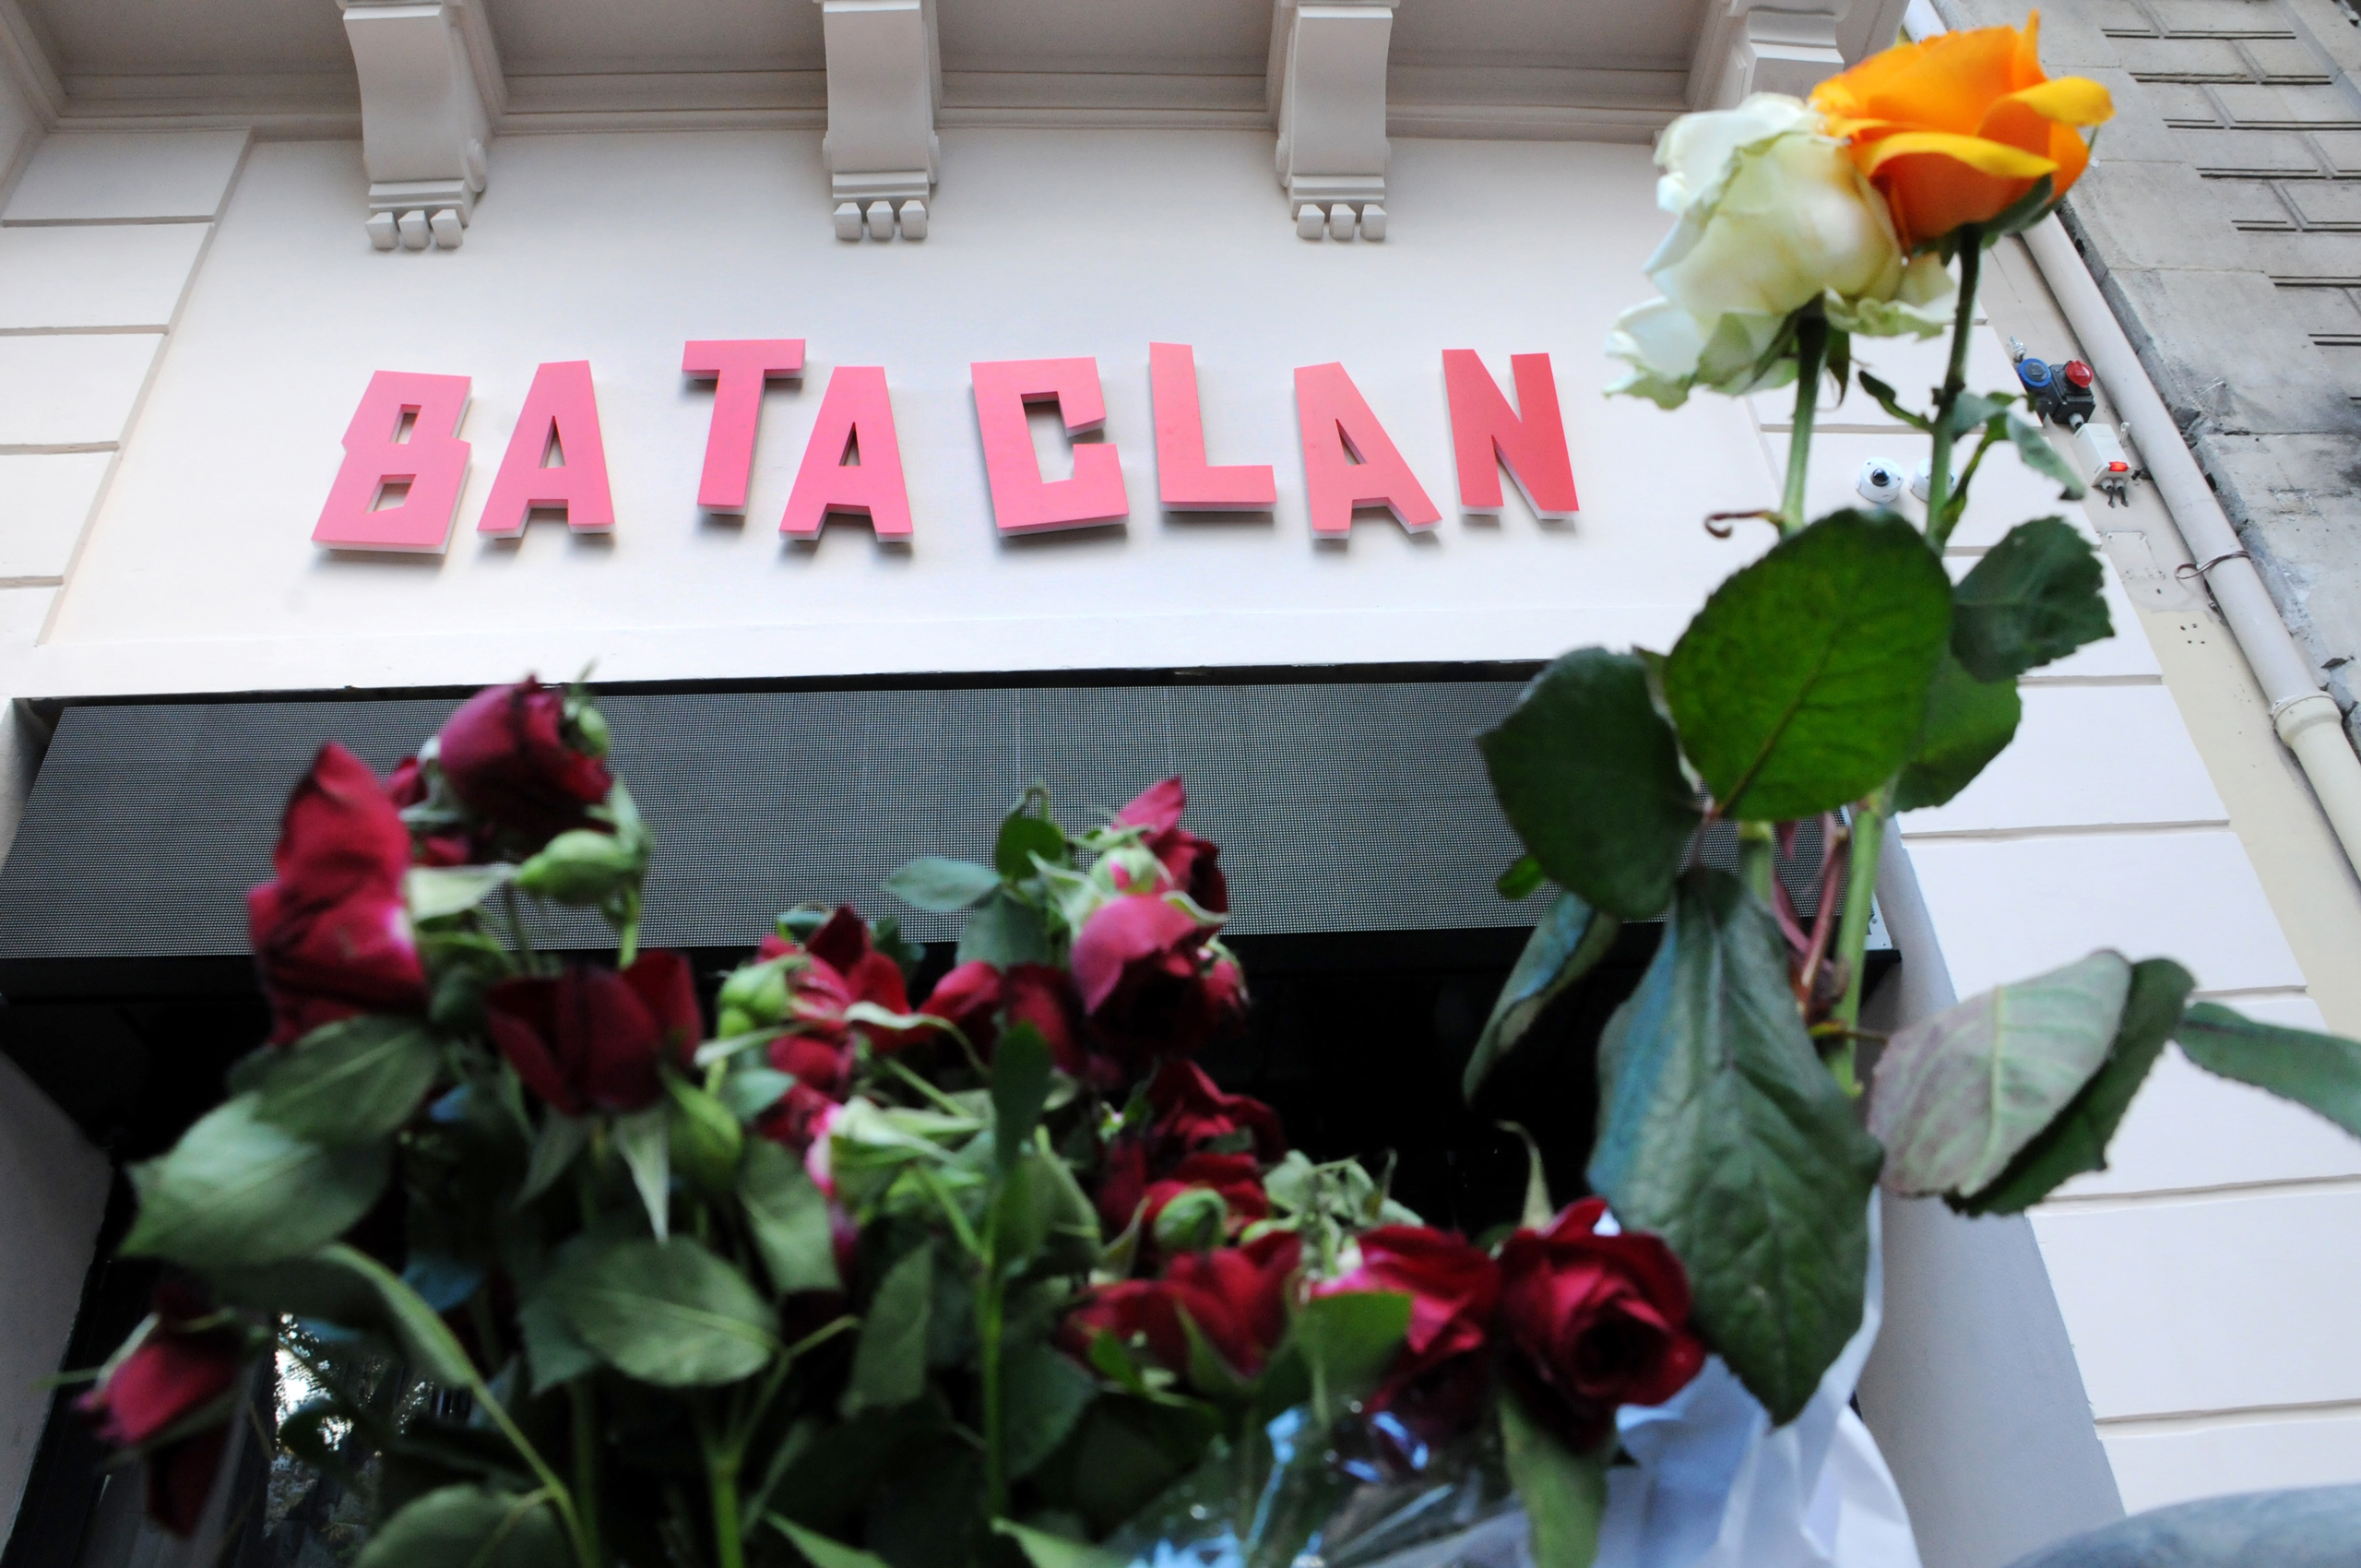 The new facade of the Bataclan concert hall, one of the targets of the November 13, 2015 terrorist attacks in Paris, on Nov. 6, 2016. (Apaydin Alain—Sipa USA/AP)